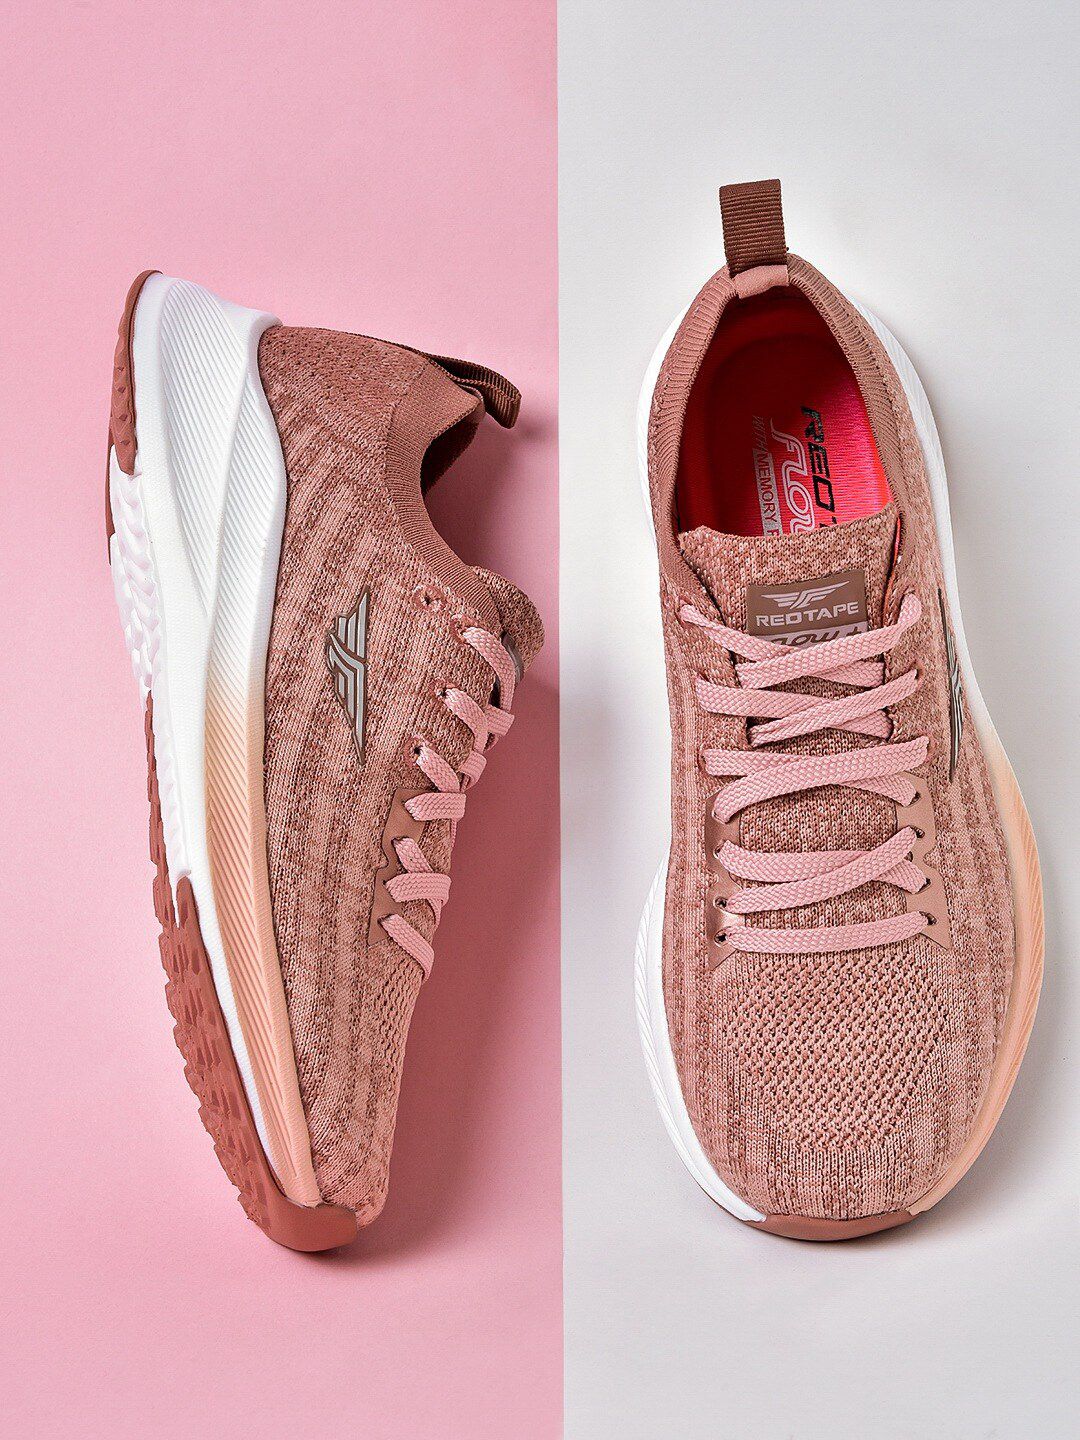 Red Tape Women Peach-Coloured Mesh Walking Sports Shoes Price in India